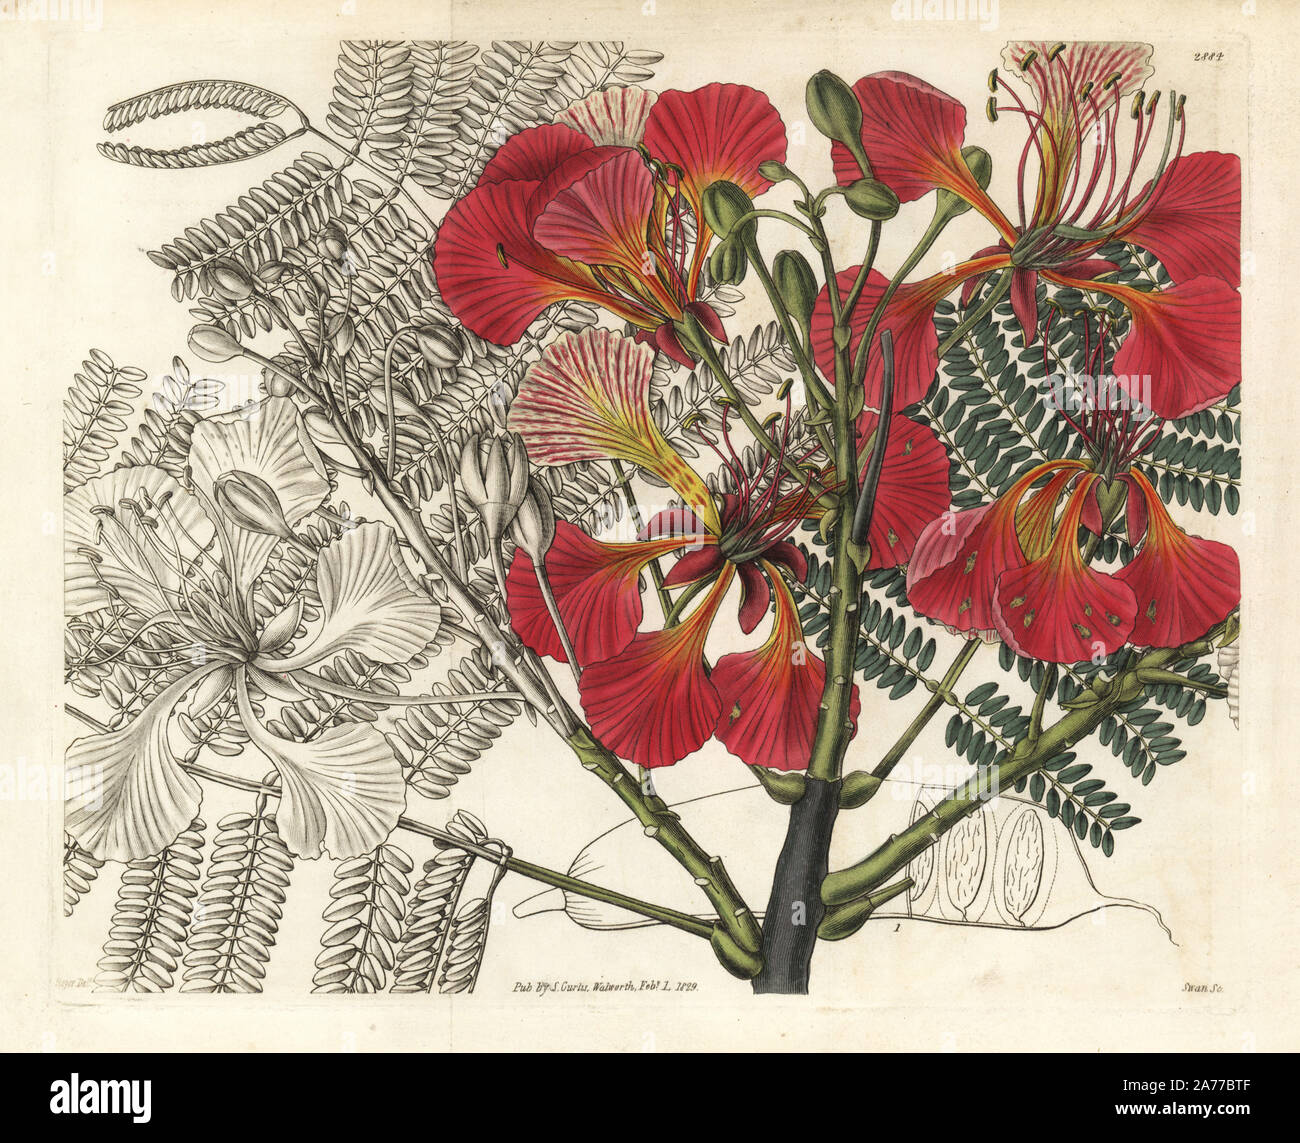 Royal poinciana, Delonix regia (Superb poinciana, Poinciana regia). Vulnerable. Handcoloured copperplate engraving by Weddell after an illustration by Bojer from Samuel Curtis's 'Botanical Magazine,' London, 1829. Stock Photo